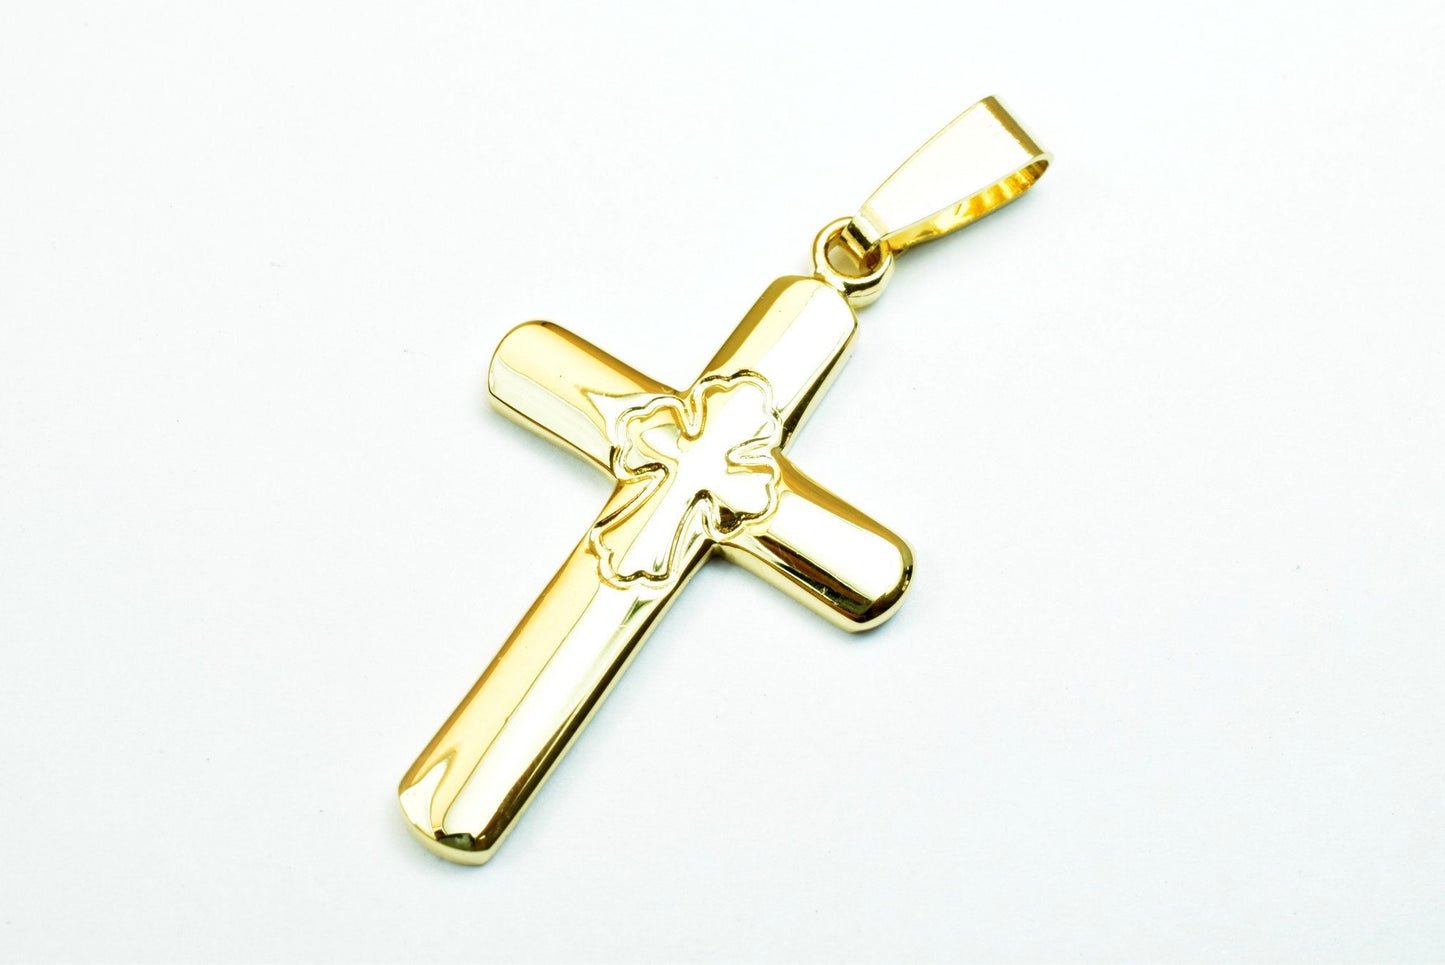 18k gold filled tarnish resistant cross pendant charm size 37x23mm christian religious cross for rosary or any jewelry making